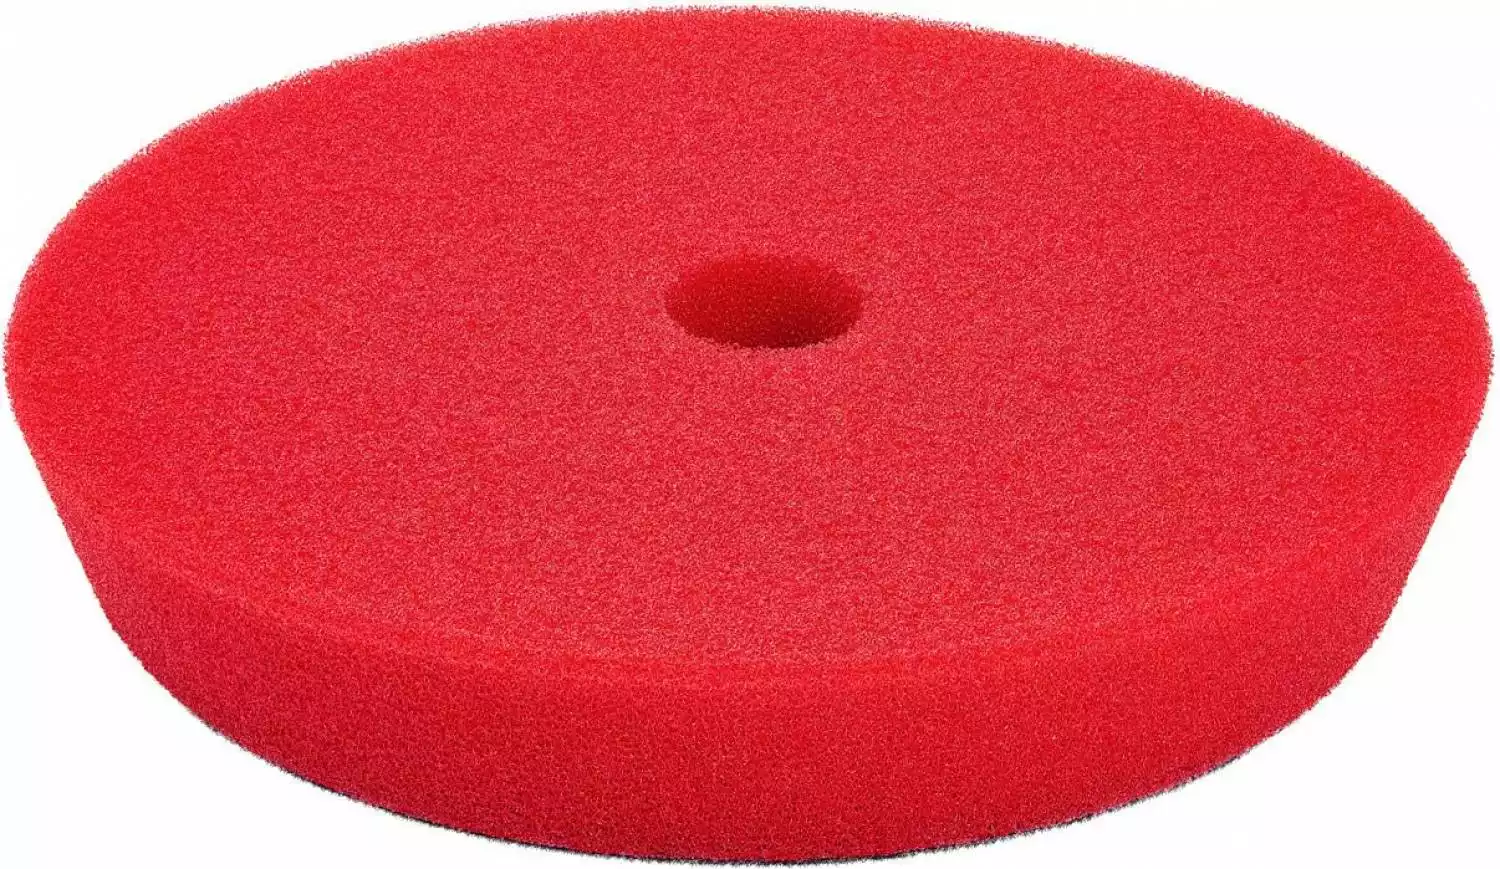 Cutting Pad rot Excenter 140 x 25 mm, 2er Pack